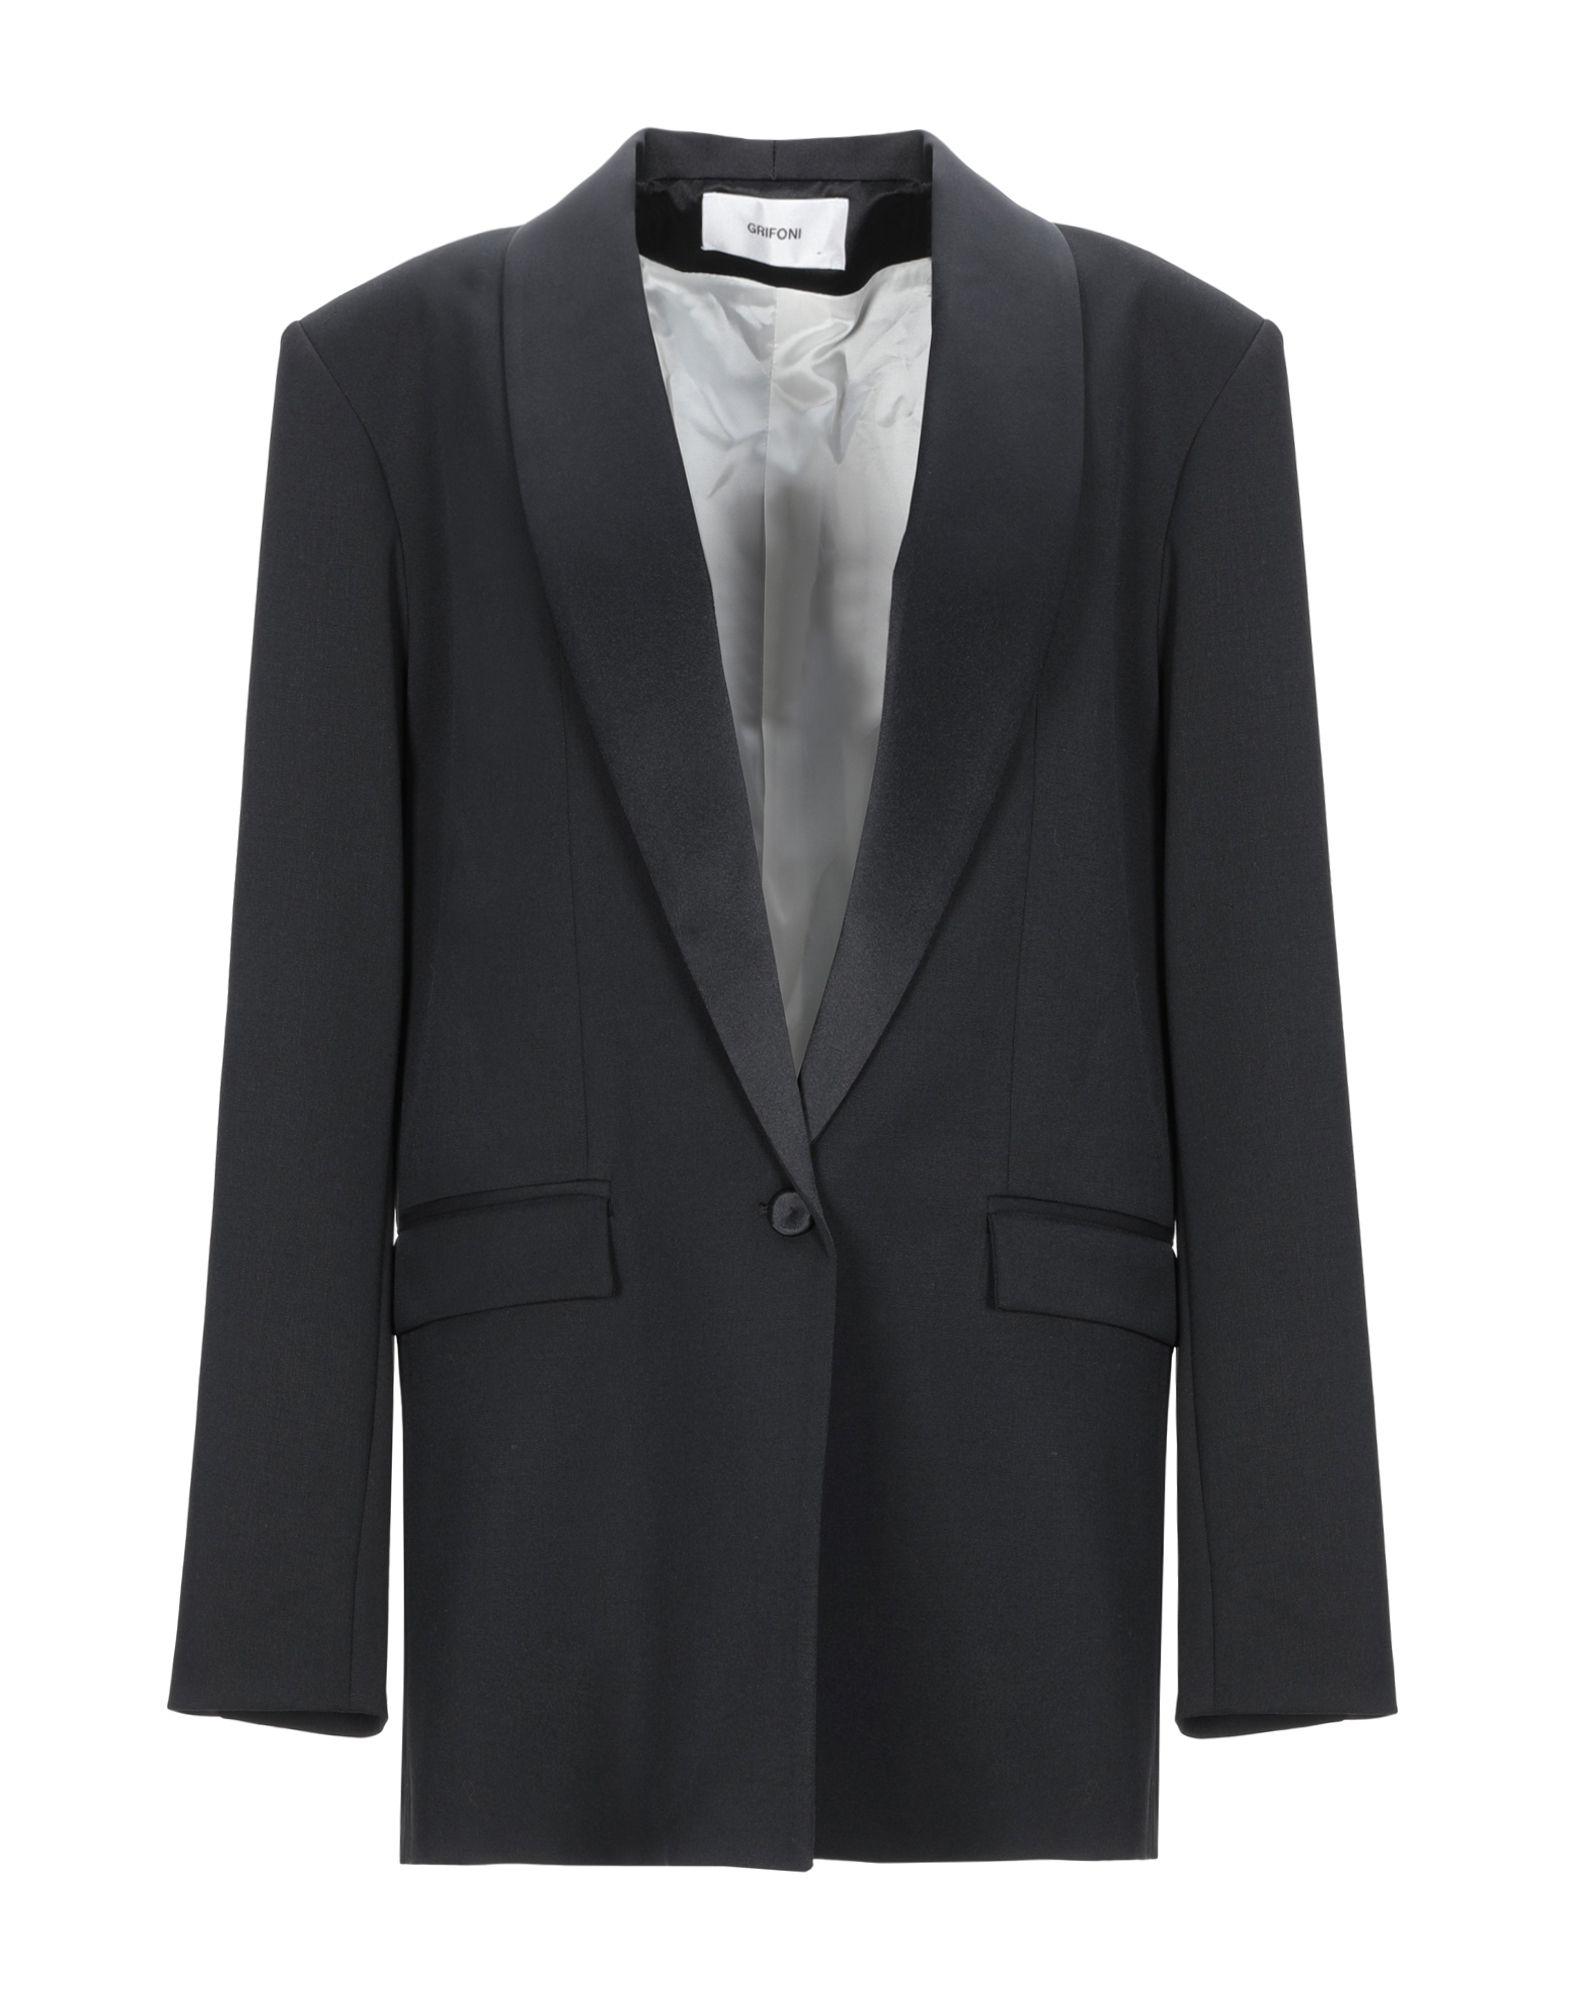 Mauro Grifoni Synthetic Blazer in Black - Lyst